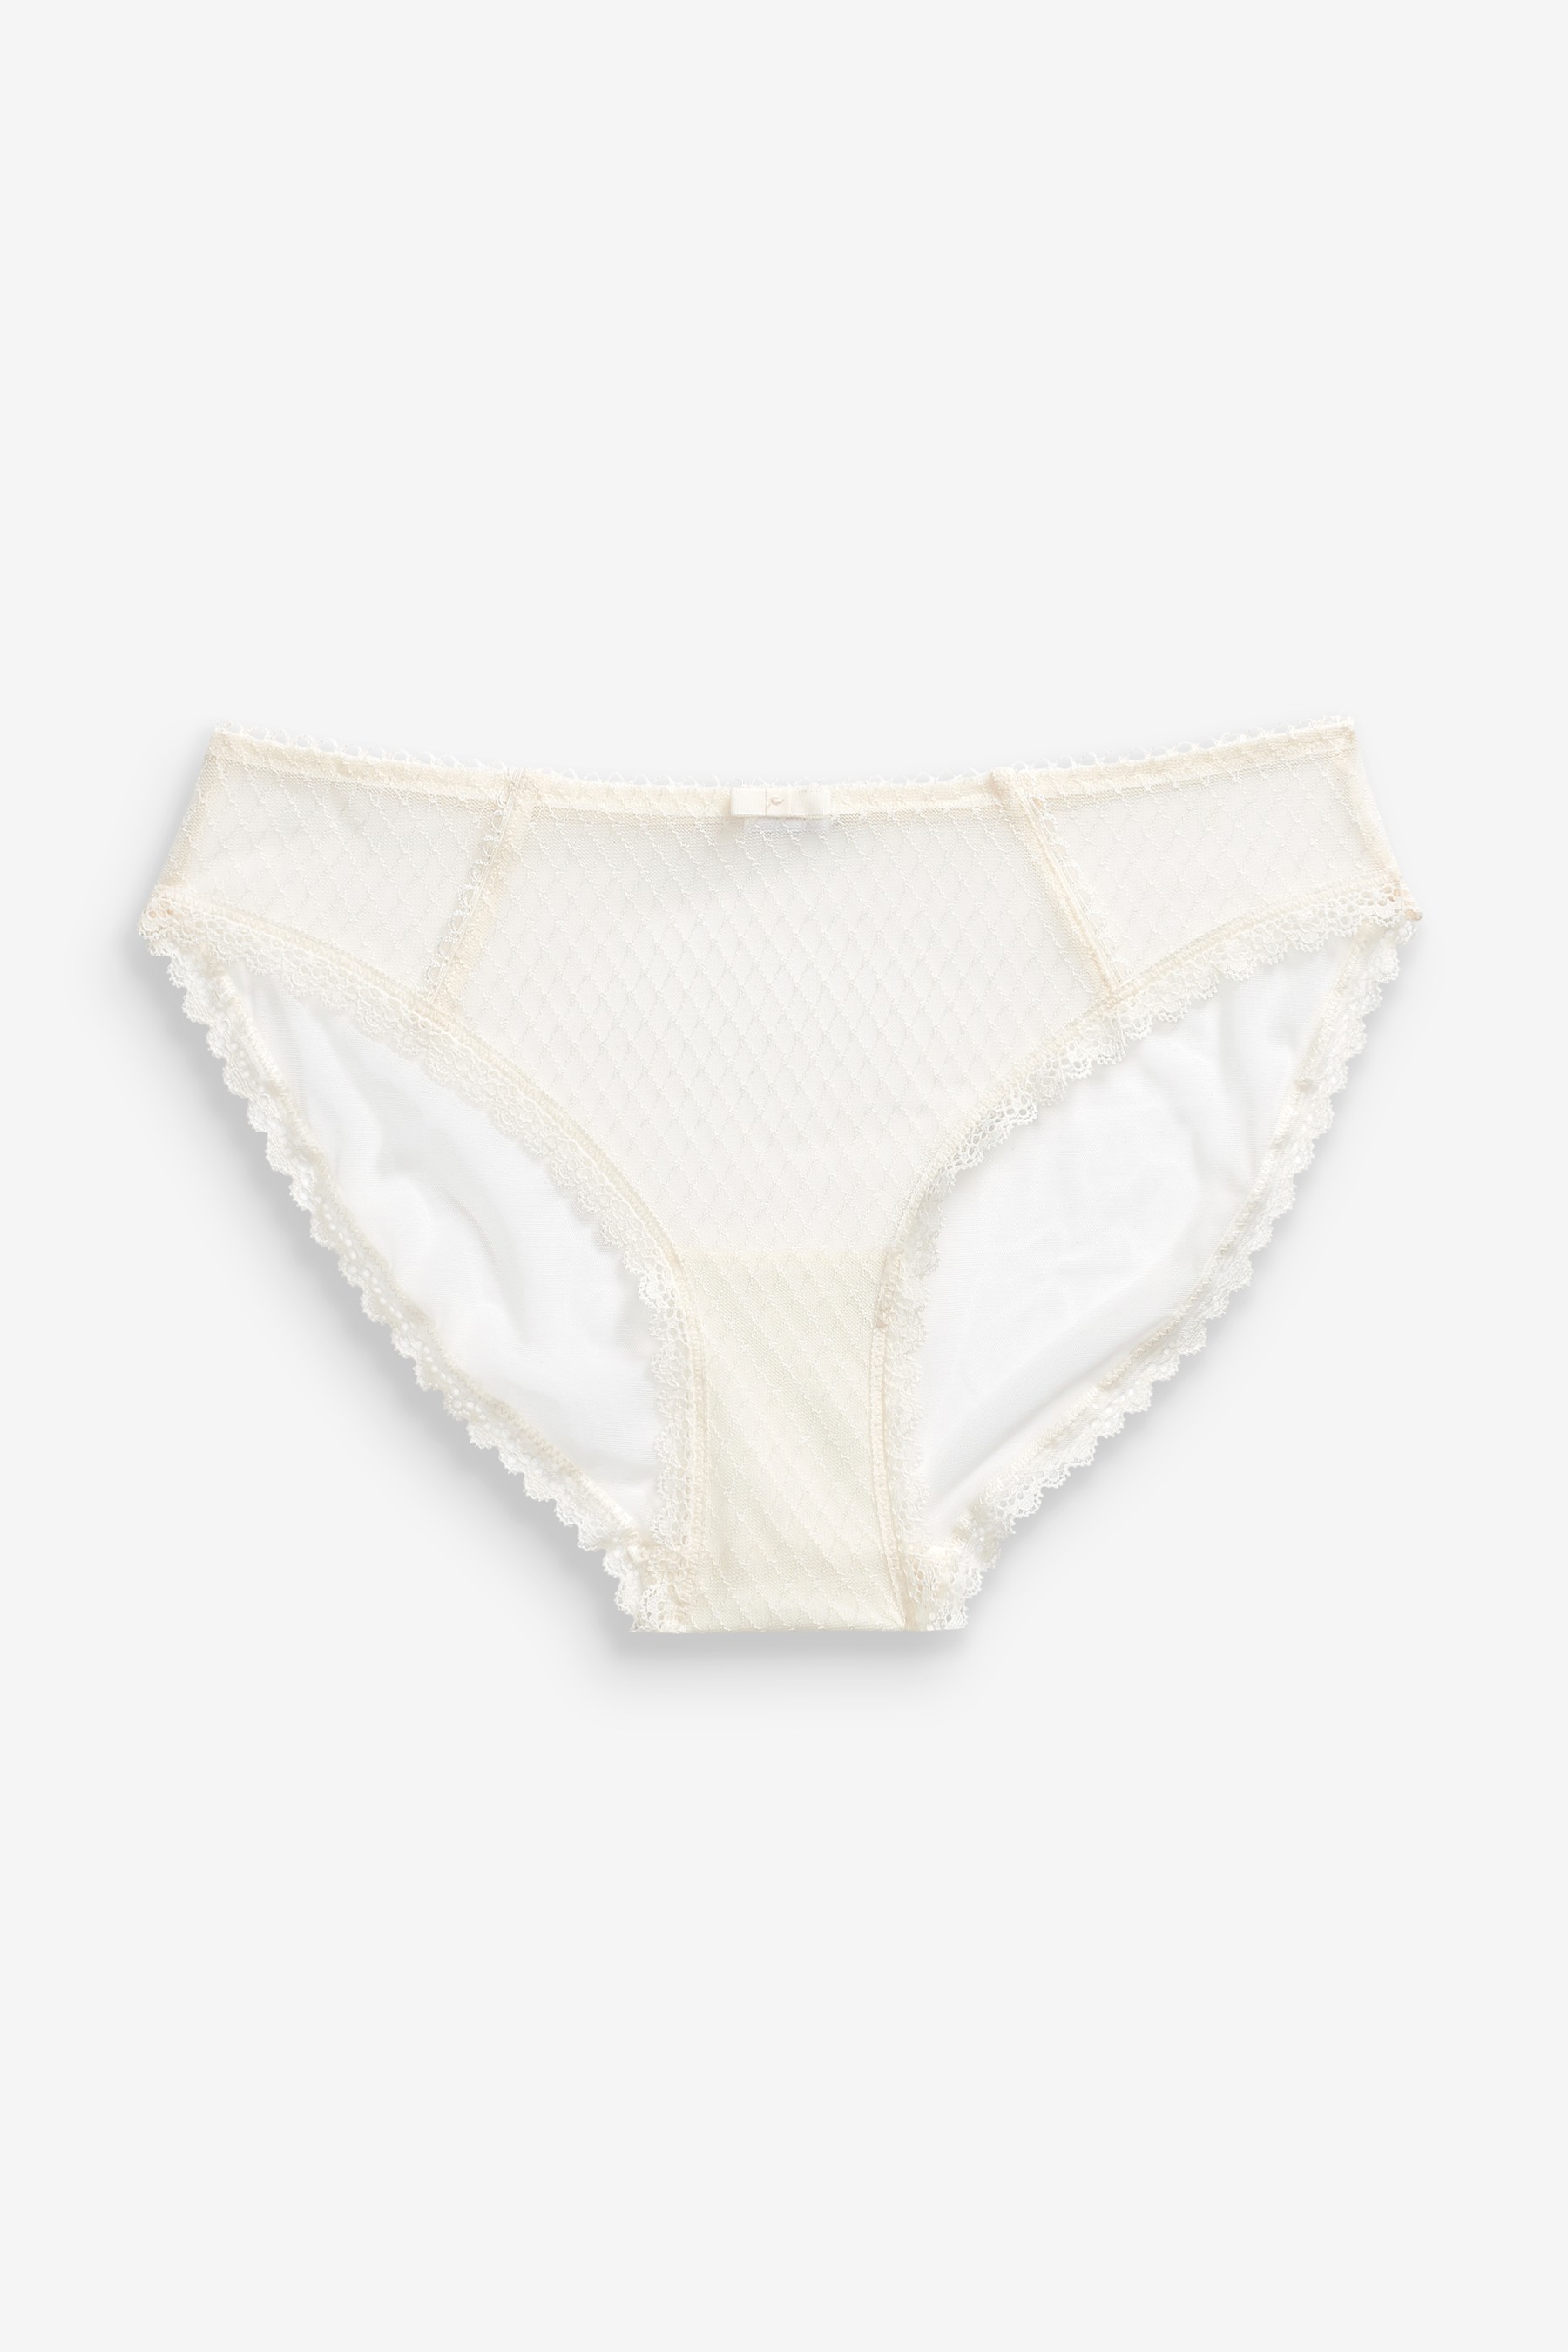 Embroidered Knickers 2 Pack High Leg